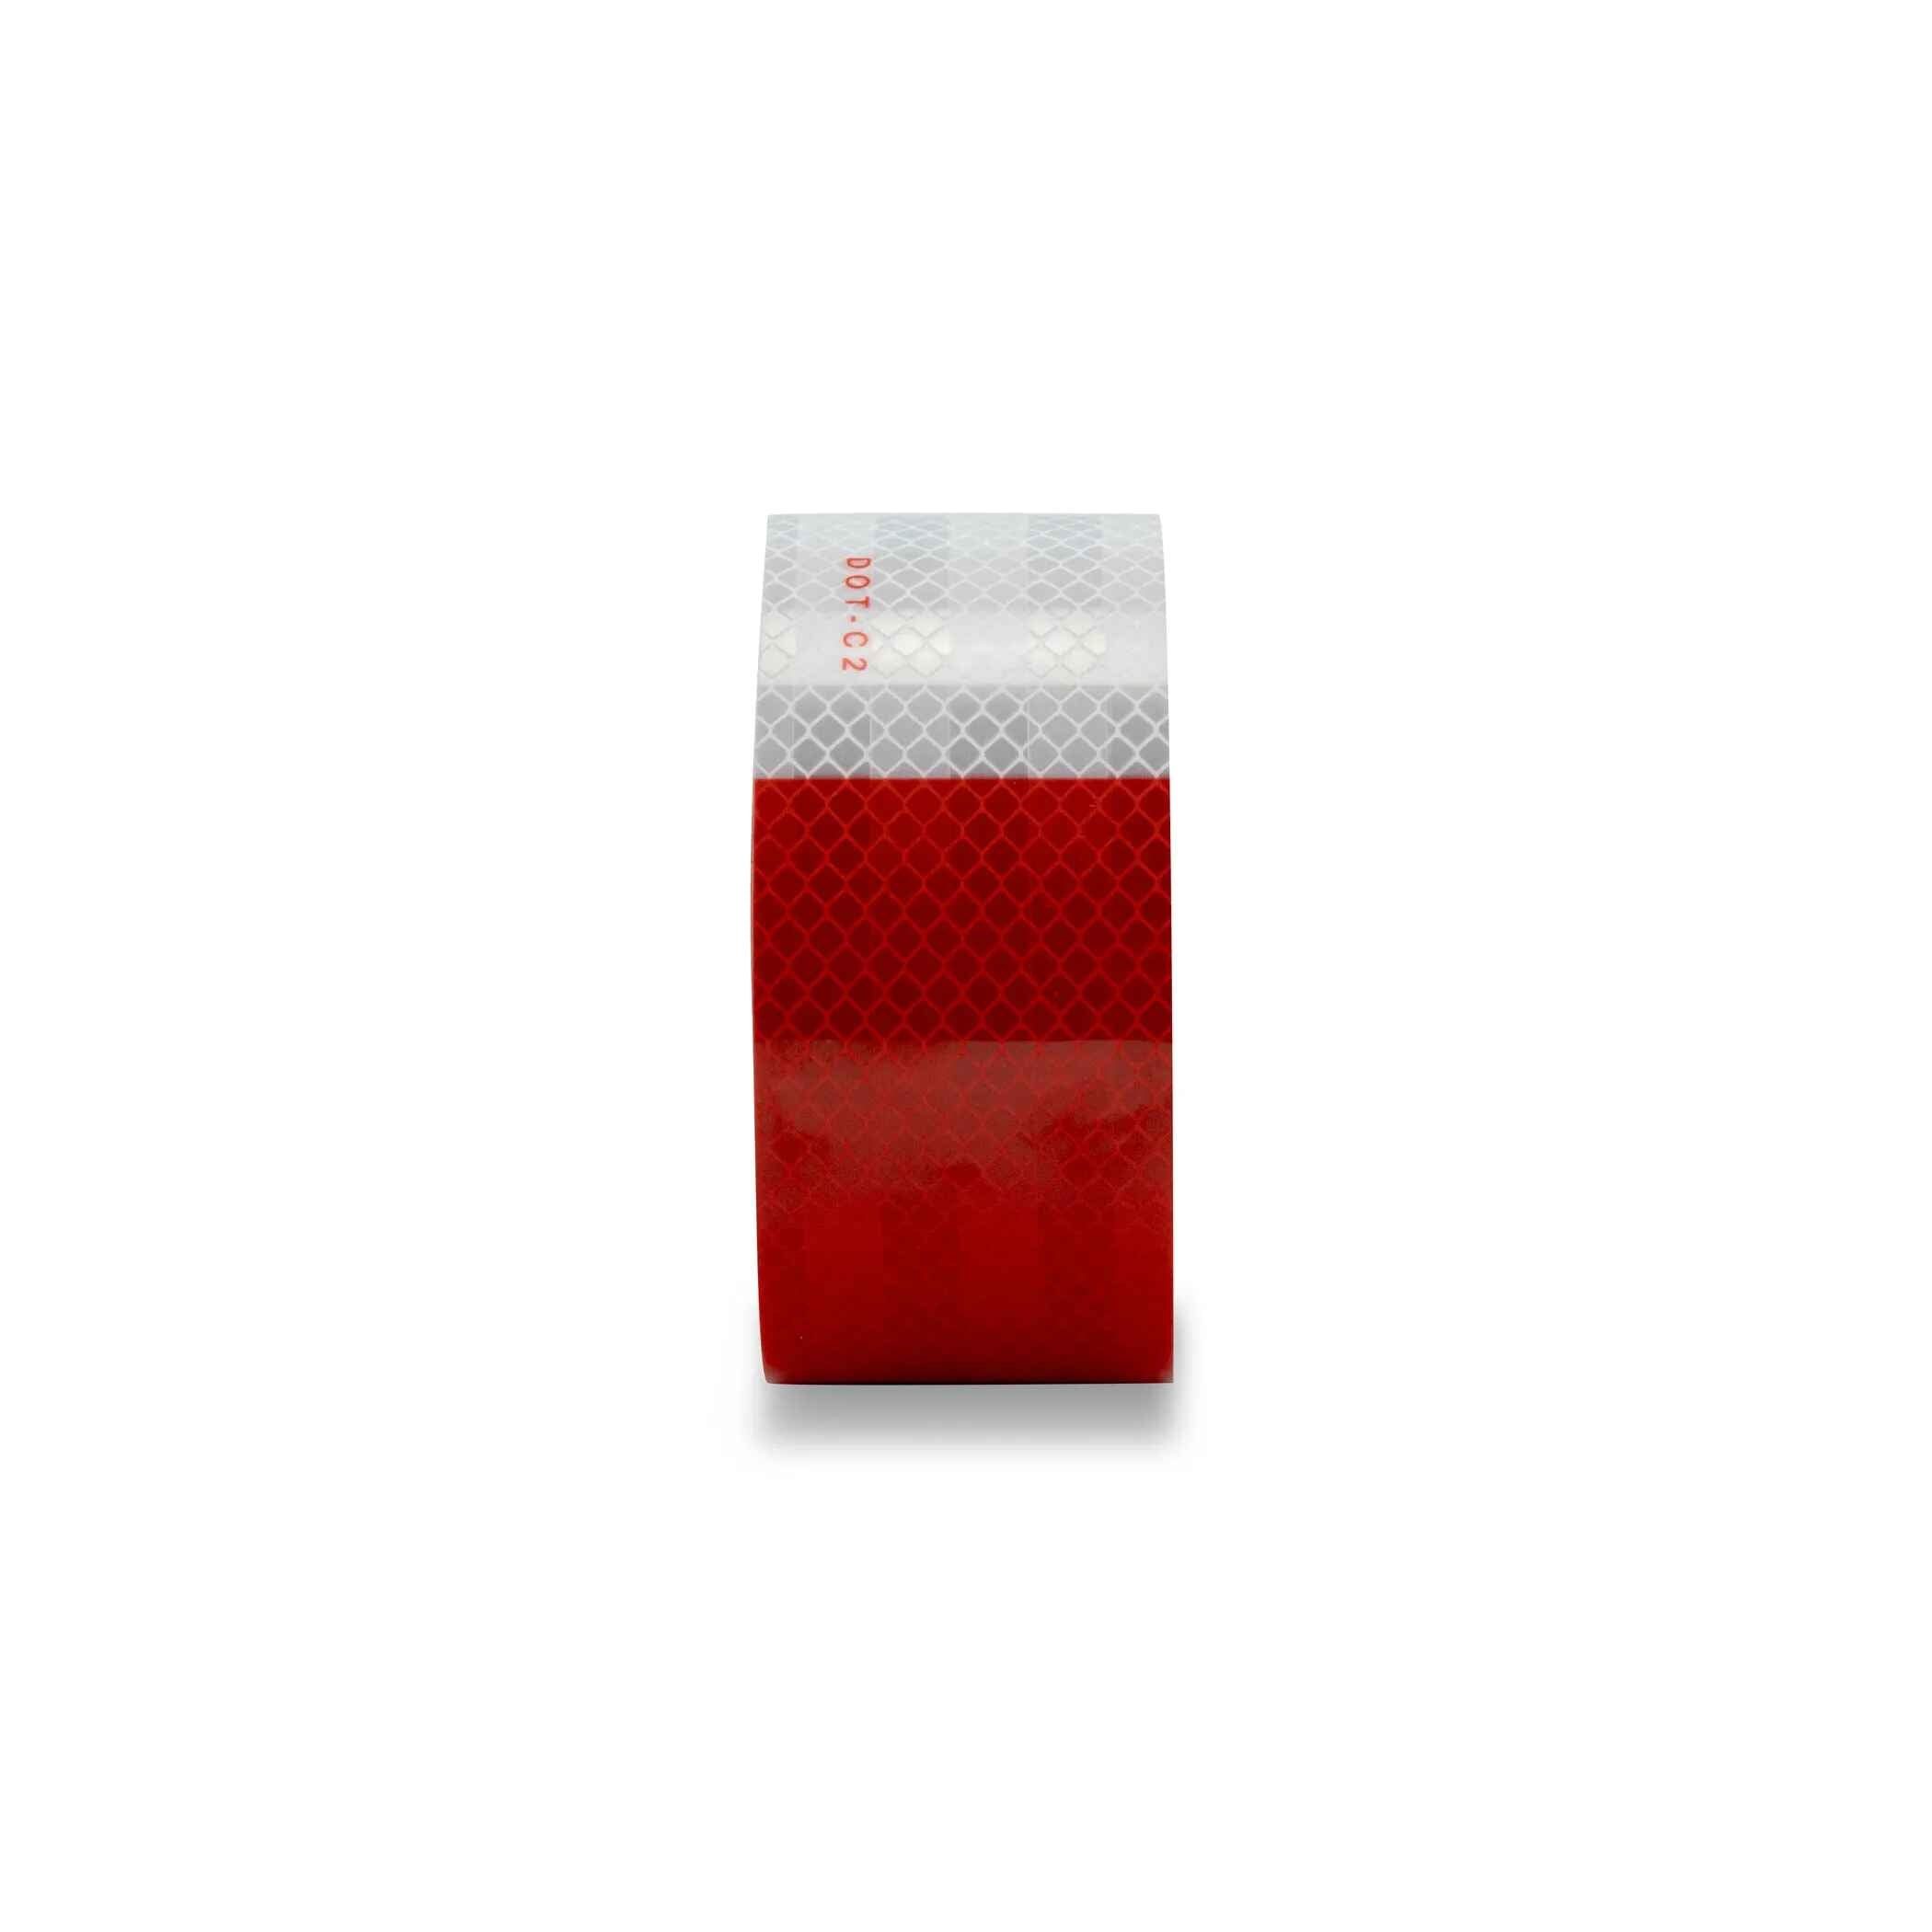 Dot C2 Reflective Adhesive Tape. Red and White Reflective. Weather-Proof Commercial Grade for Trucks/Trailers, 2x 30